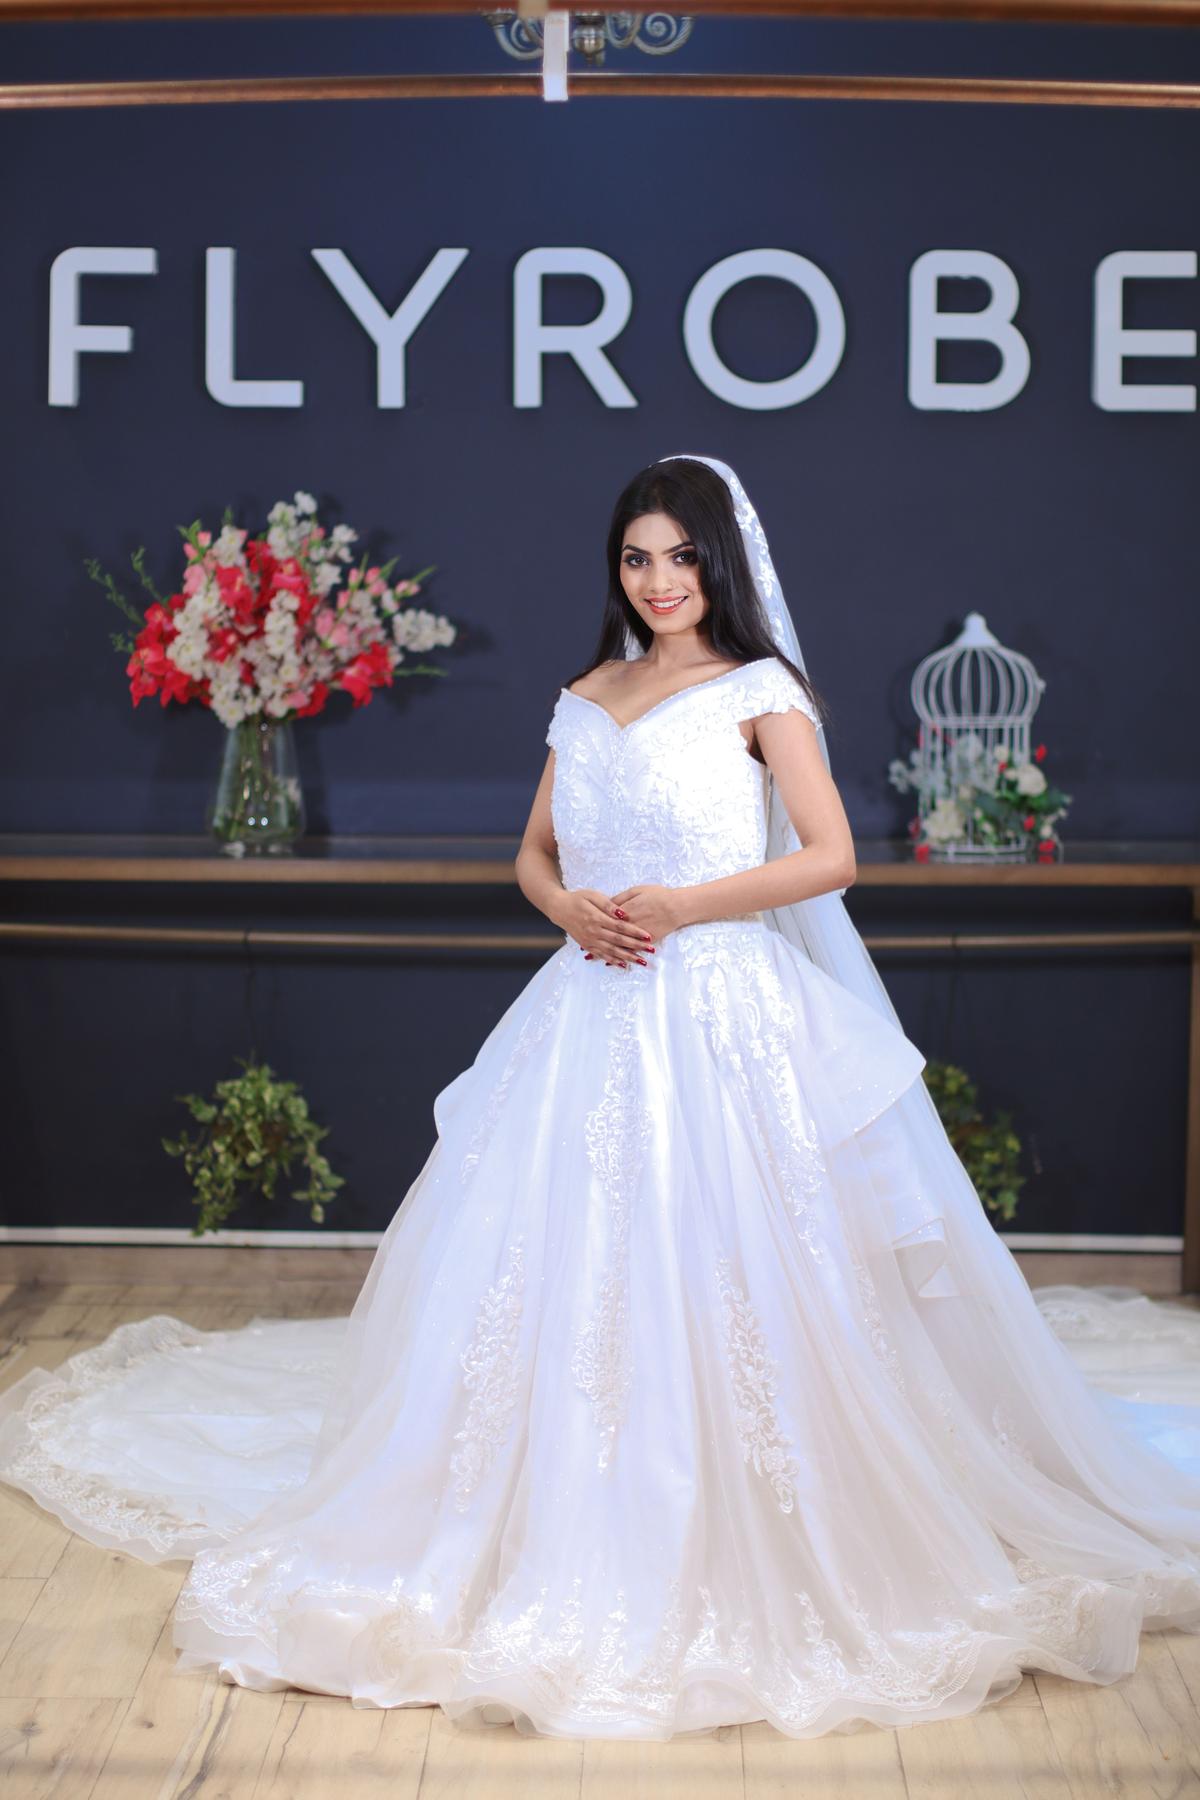 Aggregate more than 156 buy christian wedding gowns online